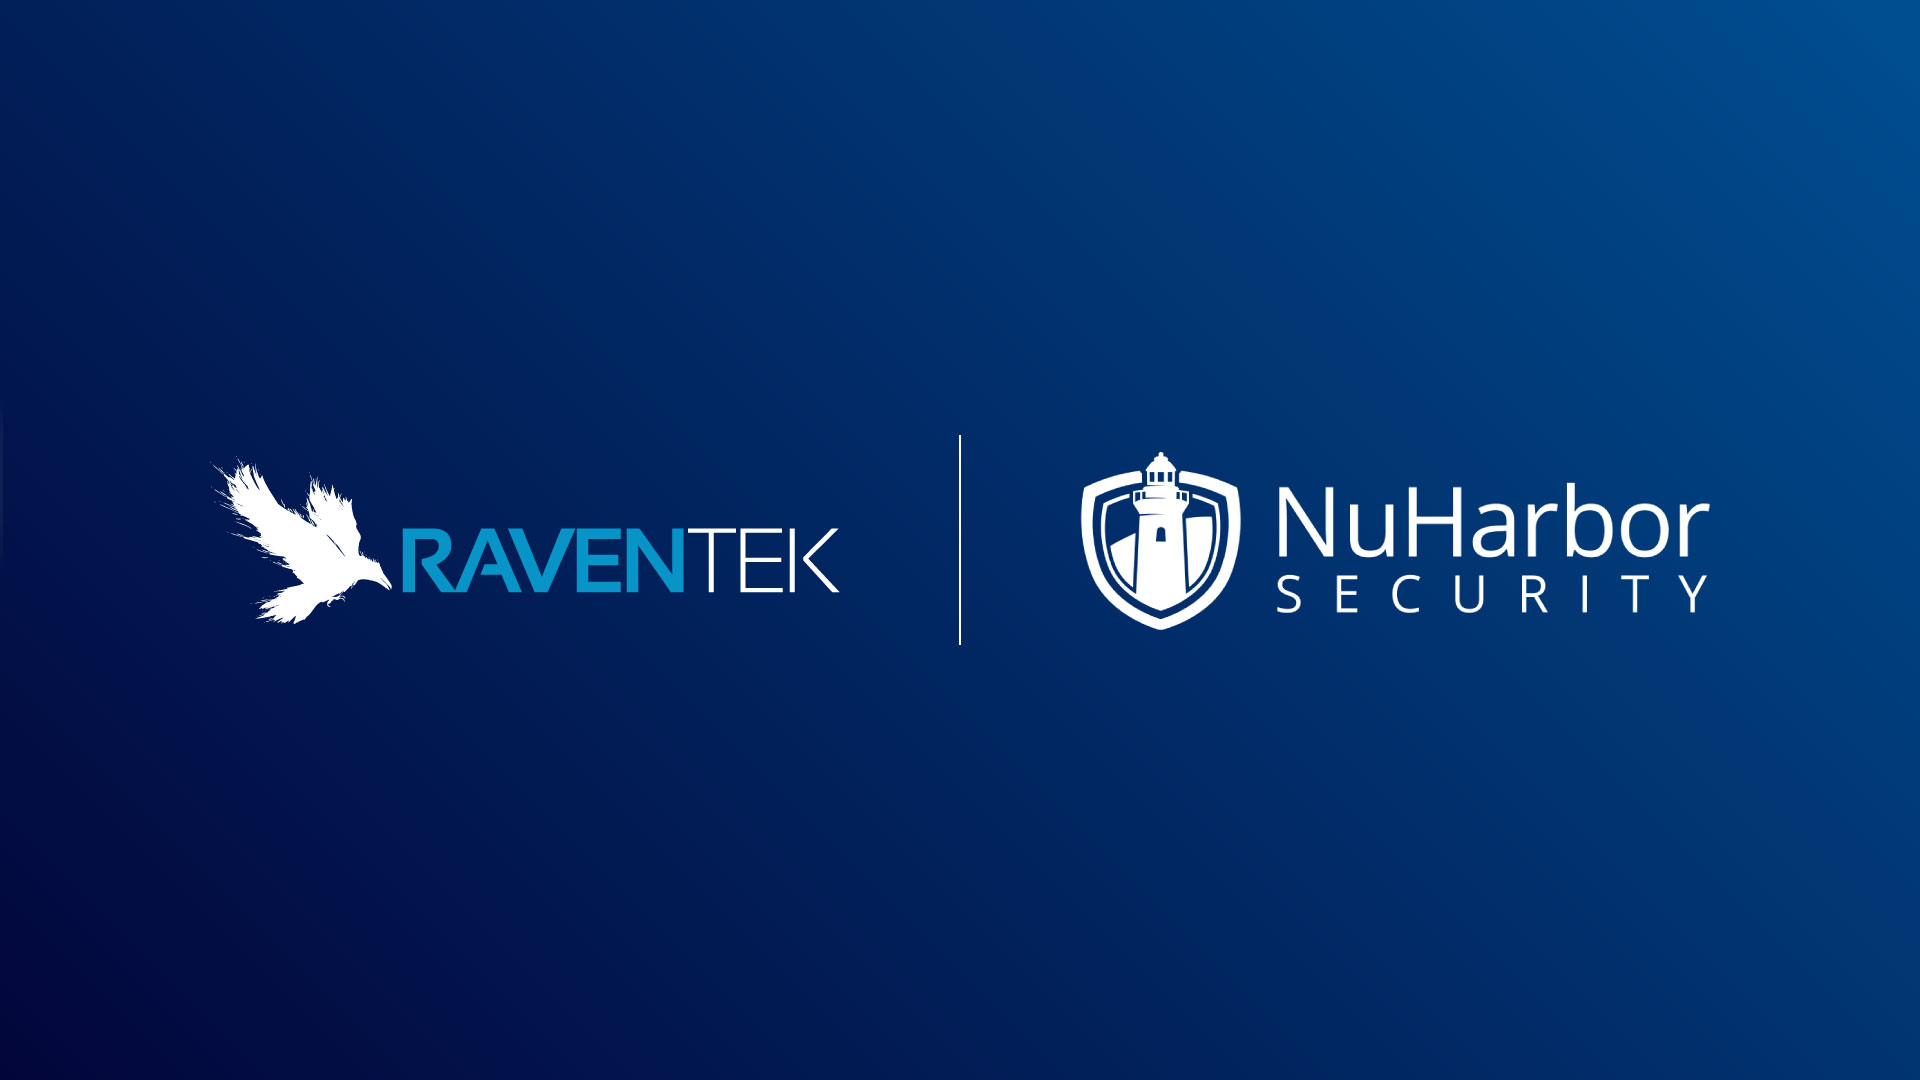 NuHarbor Security Partners with RavenTek to Offer Streamlined Splunk Services